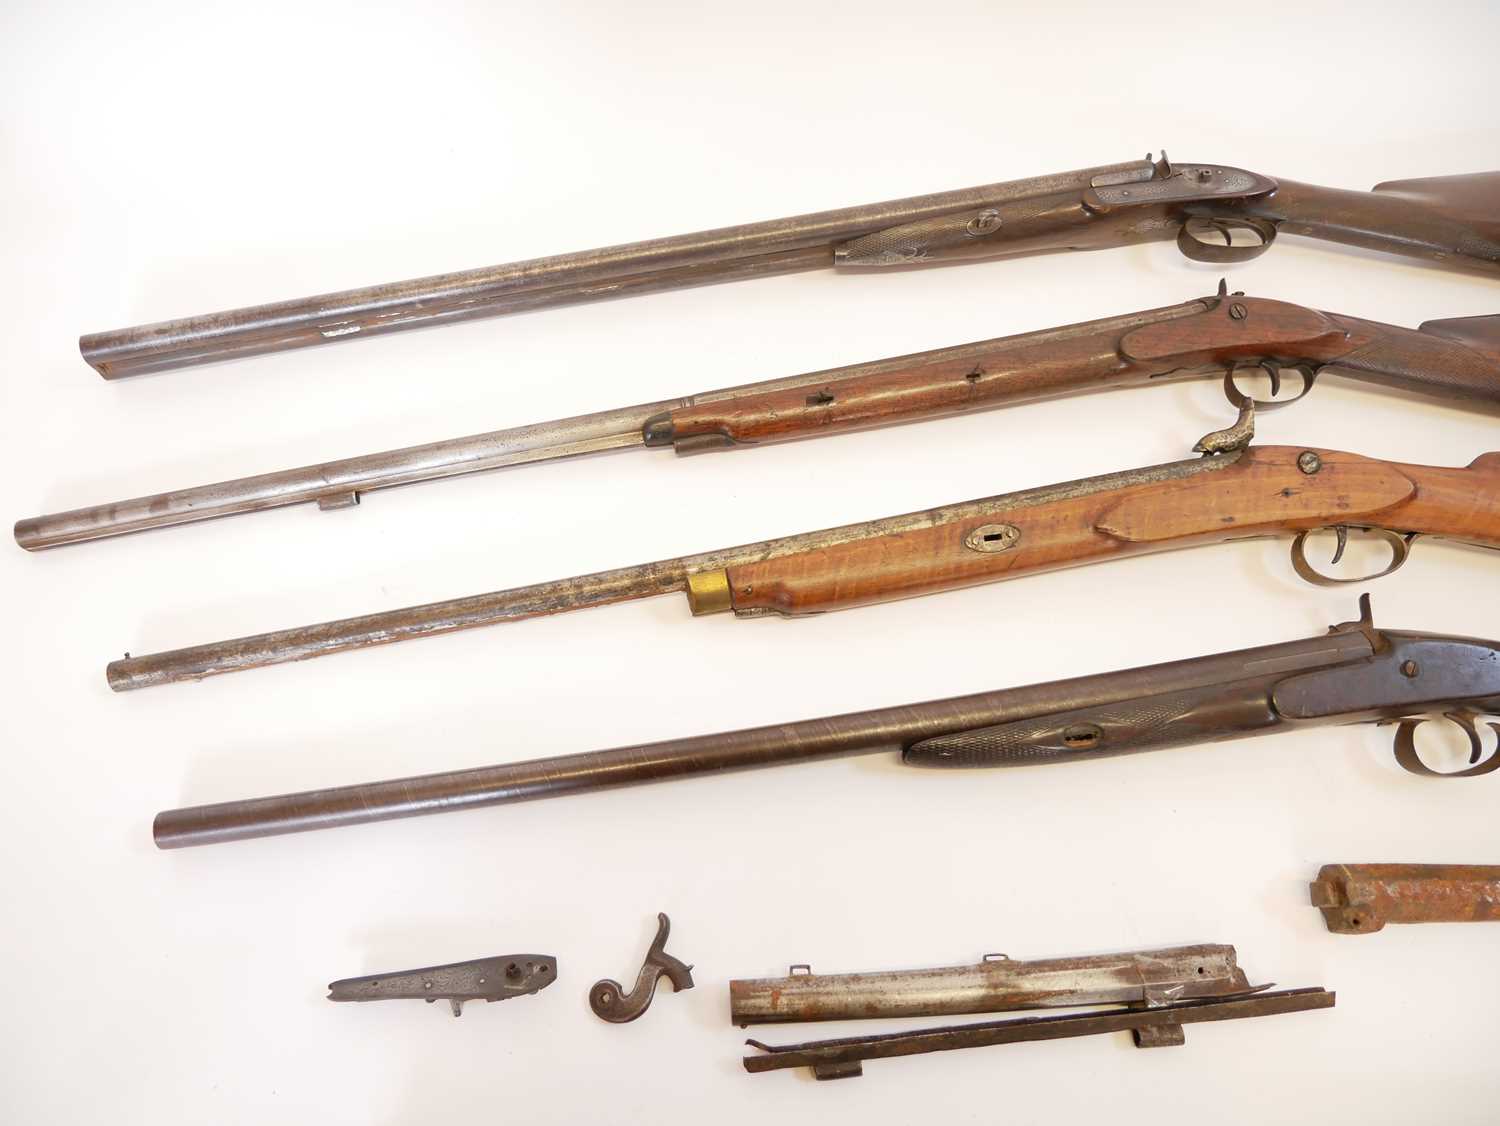 Four percussion shotguns for restoration, one a double barrel, the other three single barrels one by - Image 12 of 21